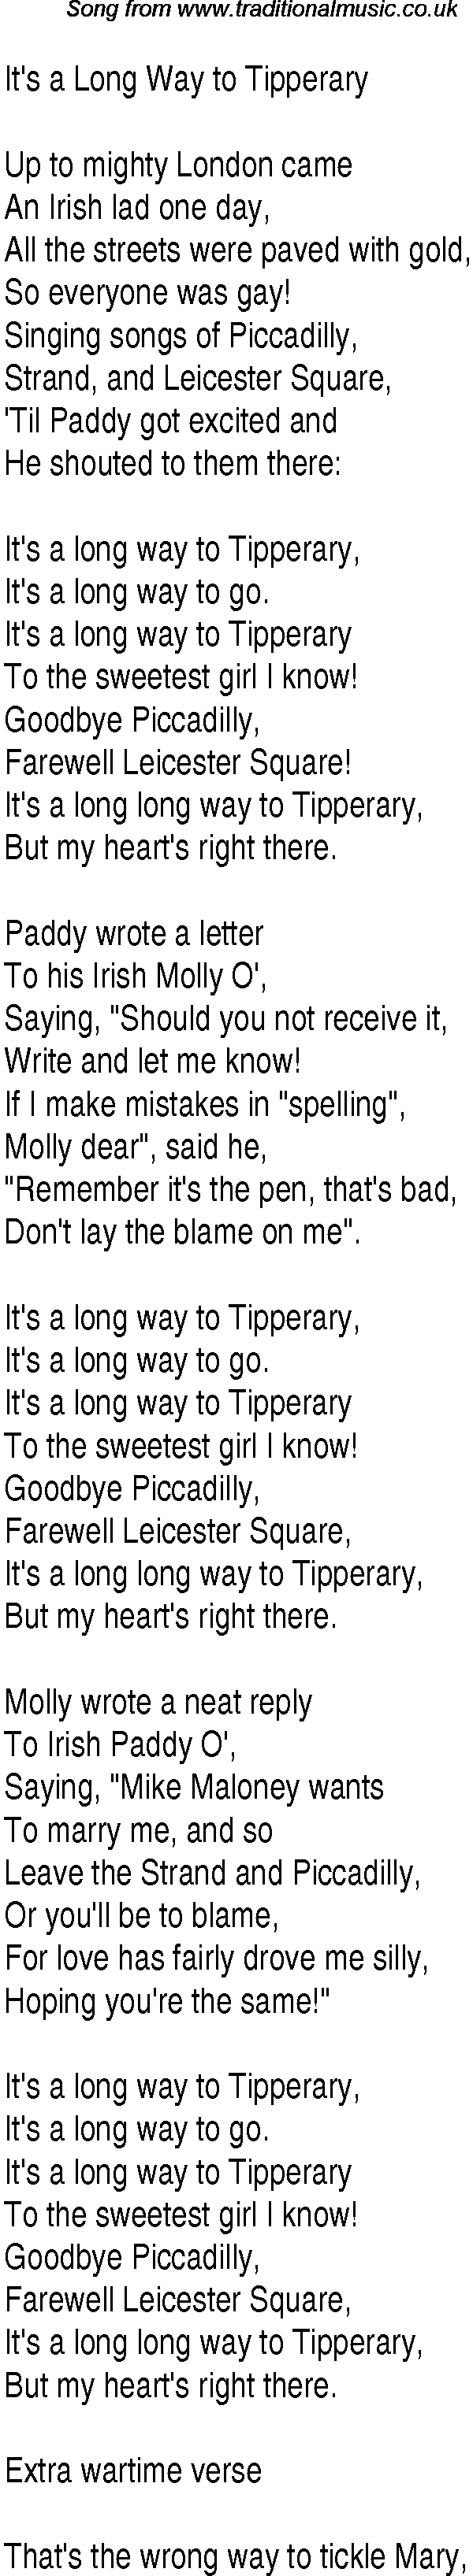 1940s top songs - lyrics for It's A Long Way To Tipperary